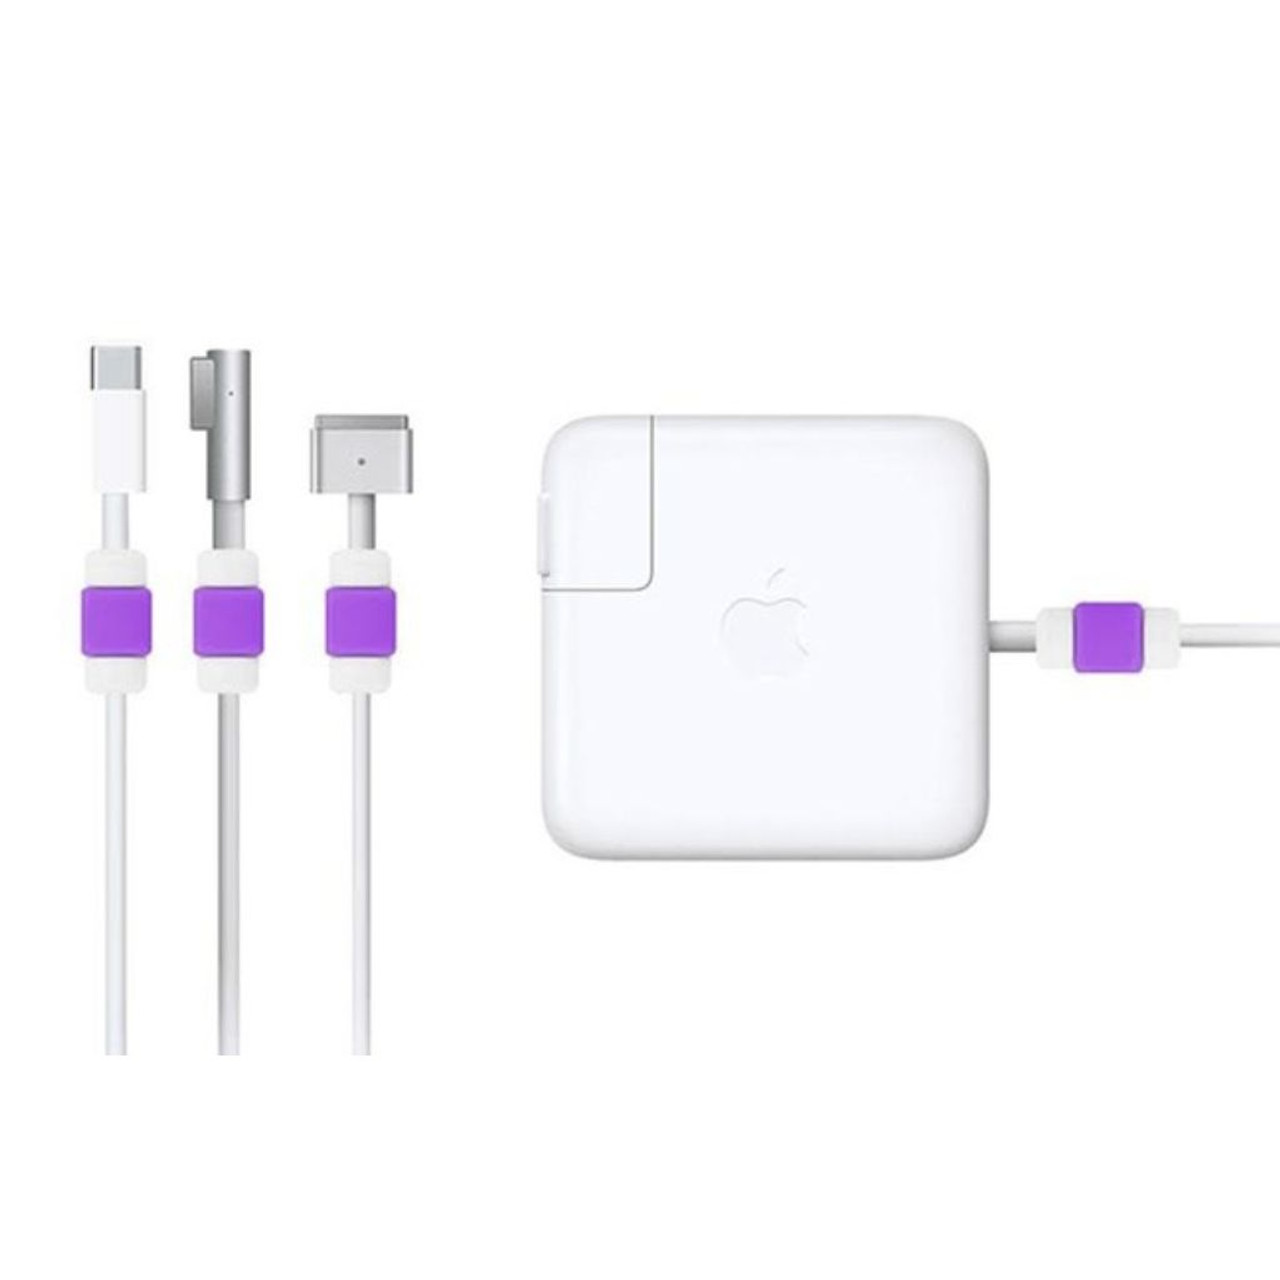 Cable Protectors for Apple MacBook Chargers (6-Pack) product image